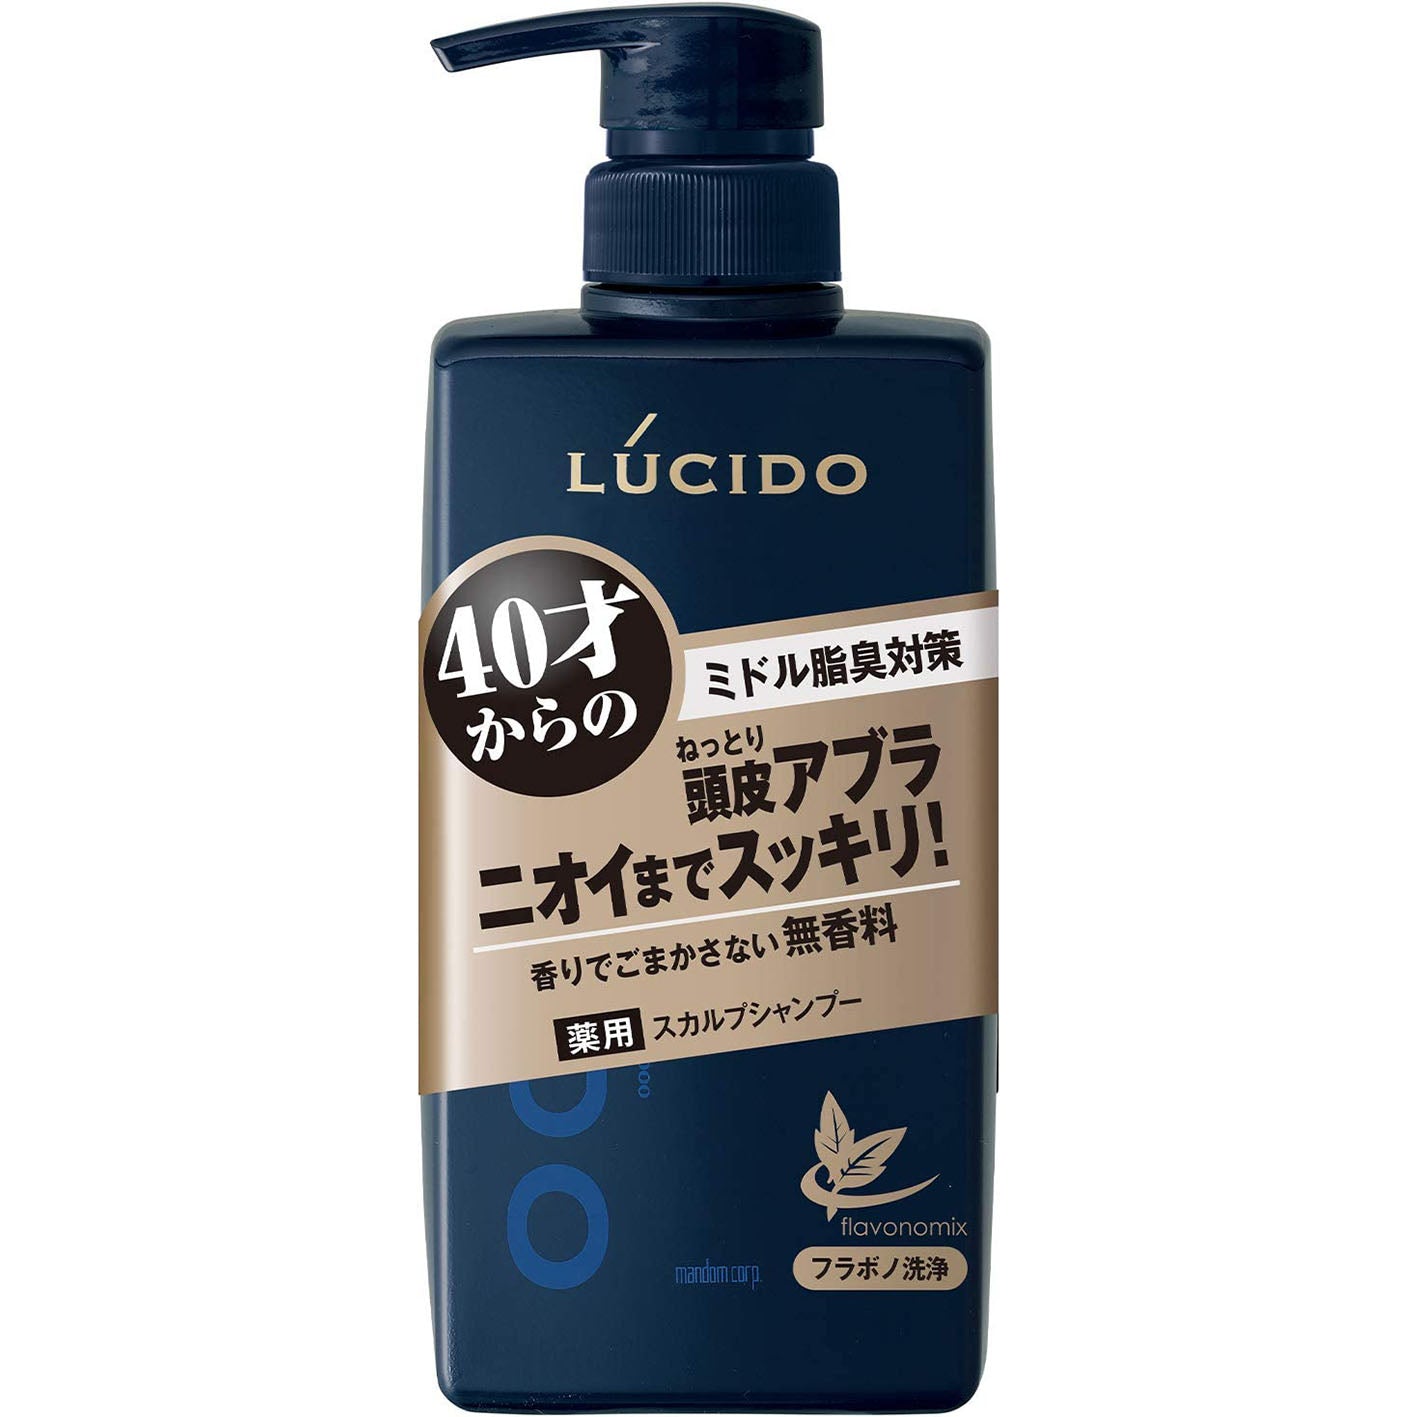 Lucido Medicated Scalp Deodorant Shampoo 450ml - Harajuku Culture Japan - Japanease Products Store Beauty and Stationery